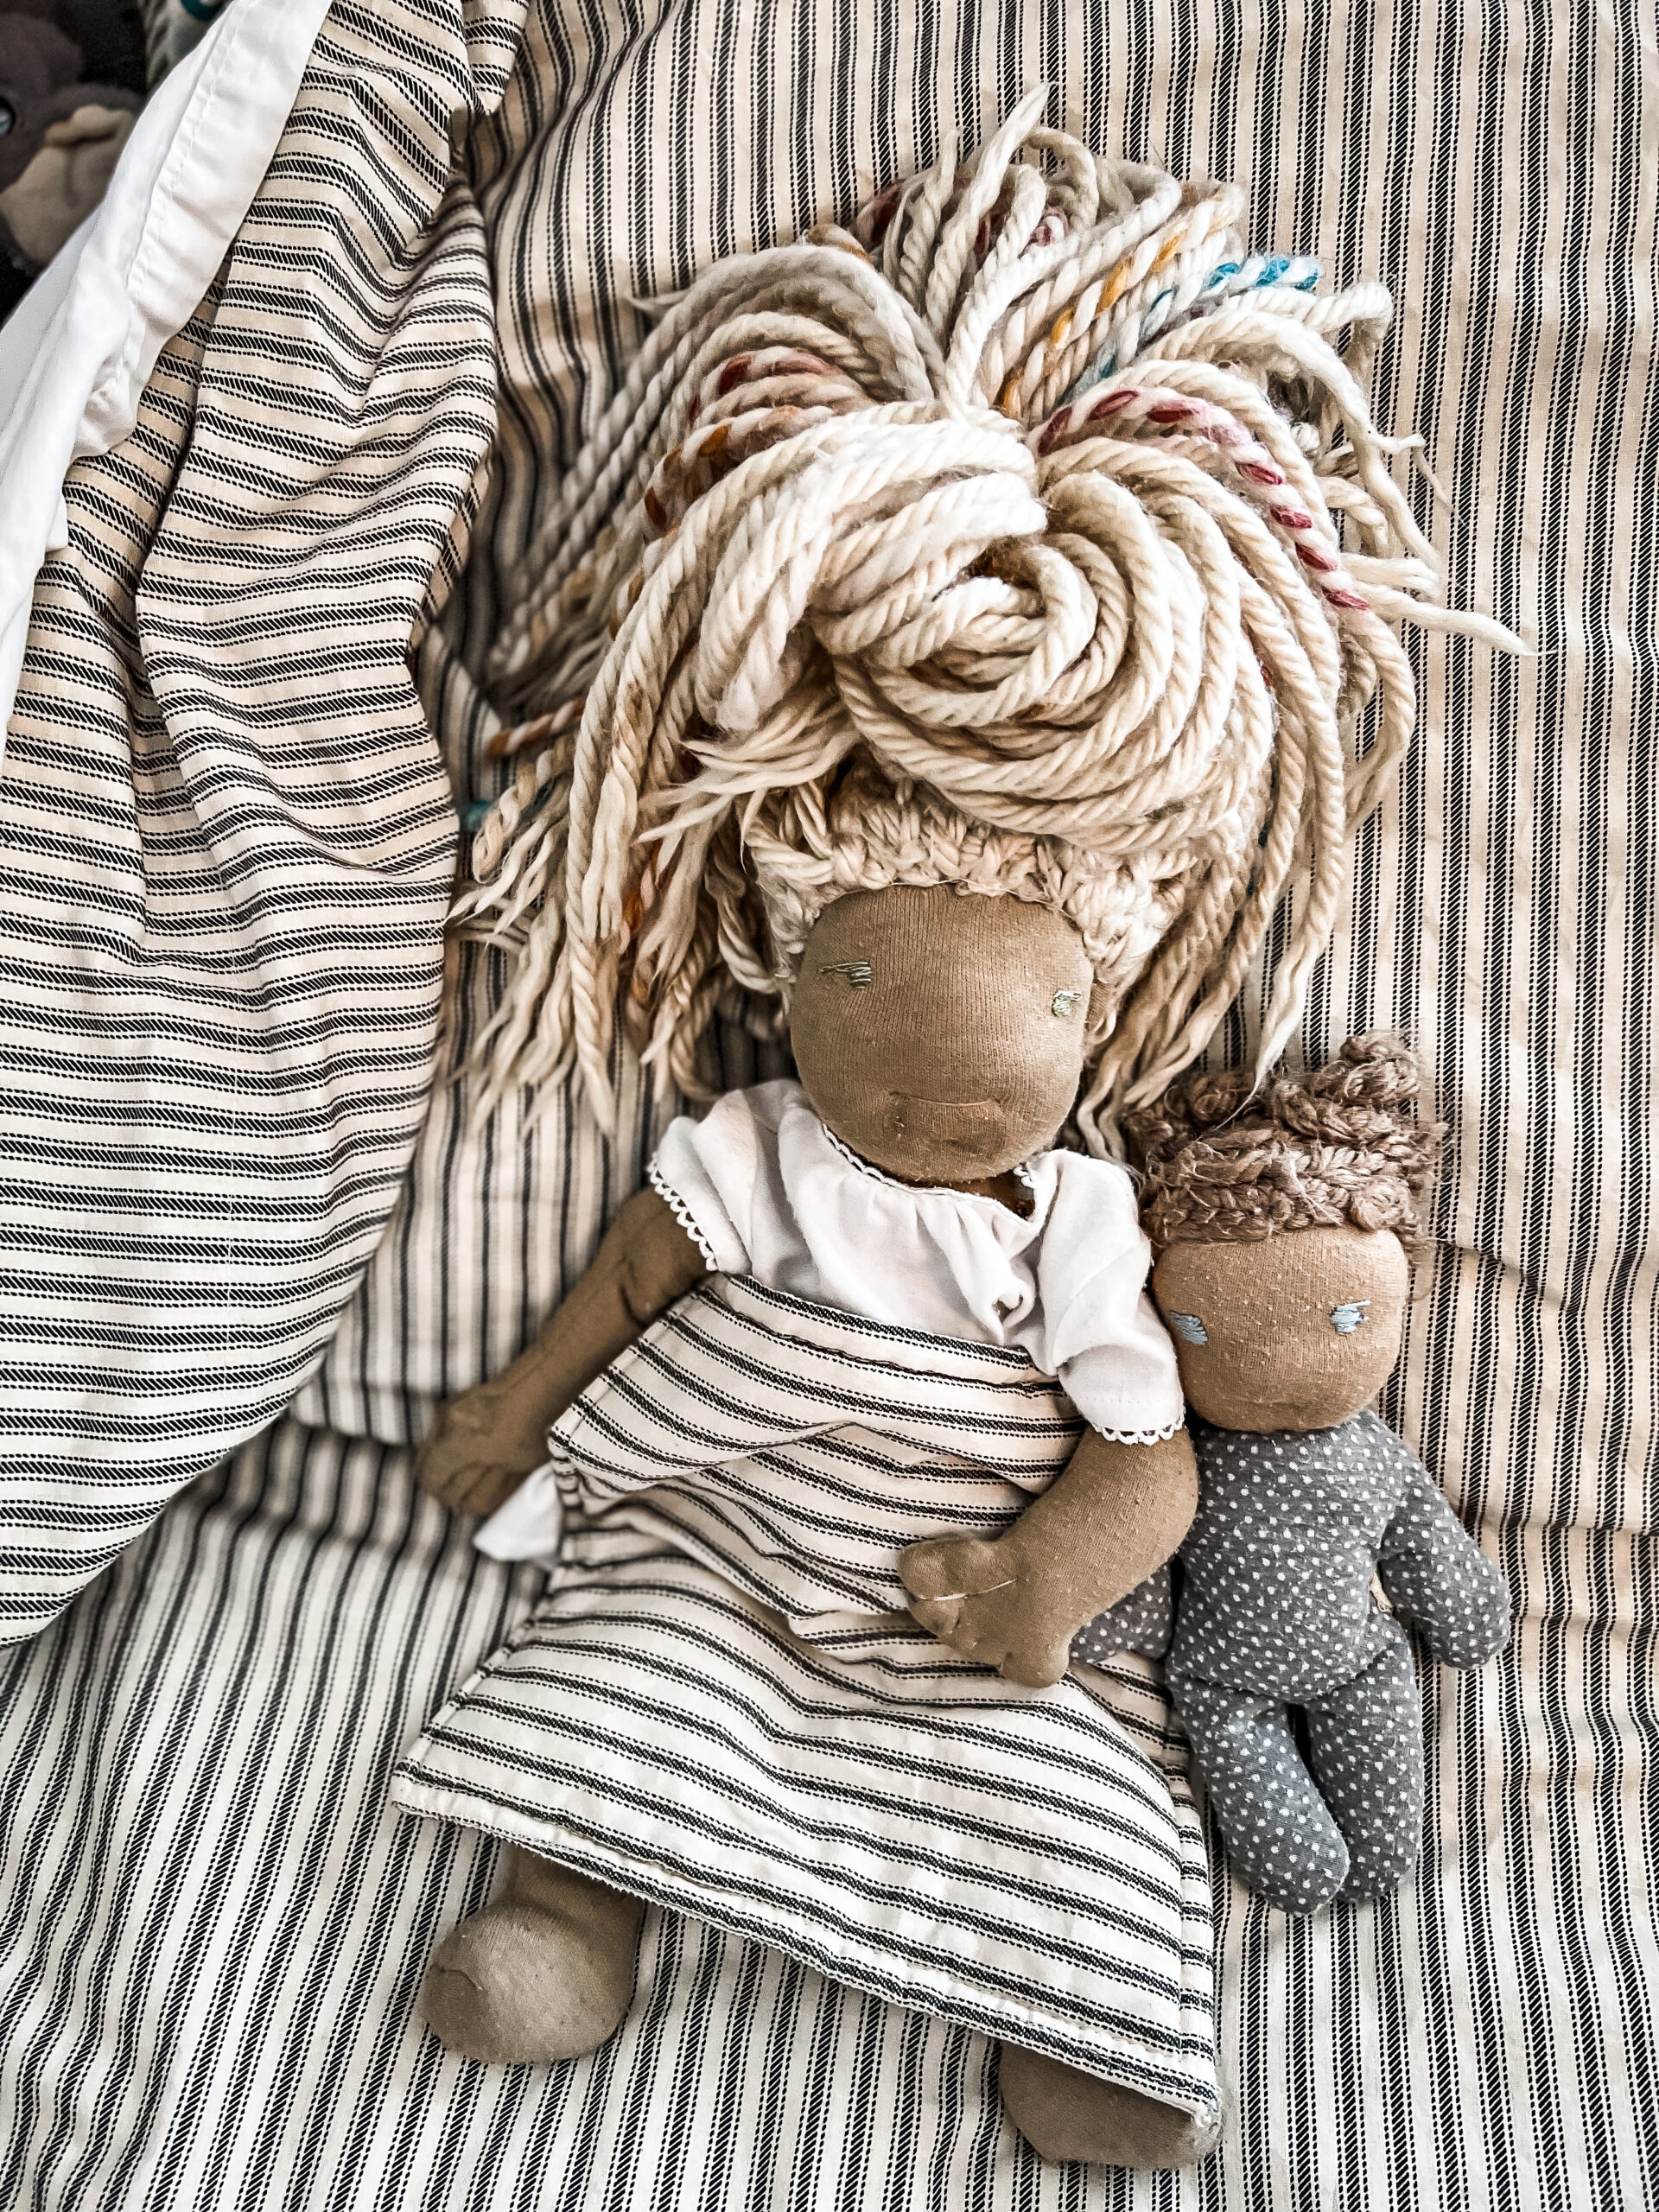 two dolls laying on stripped sheets